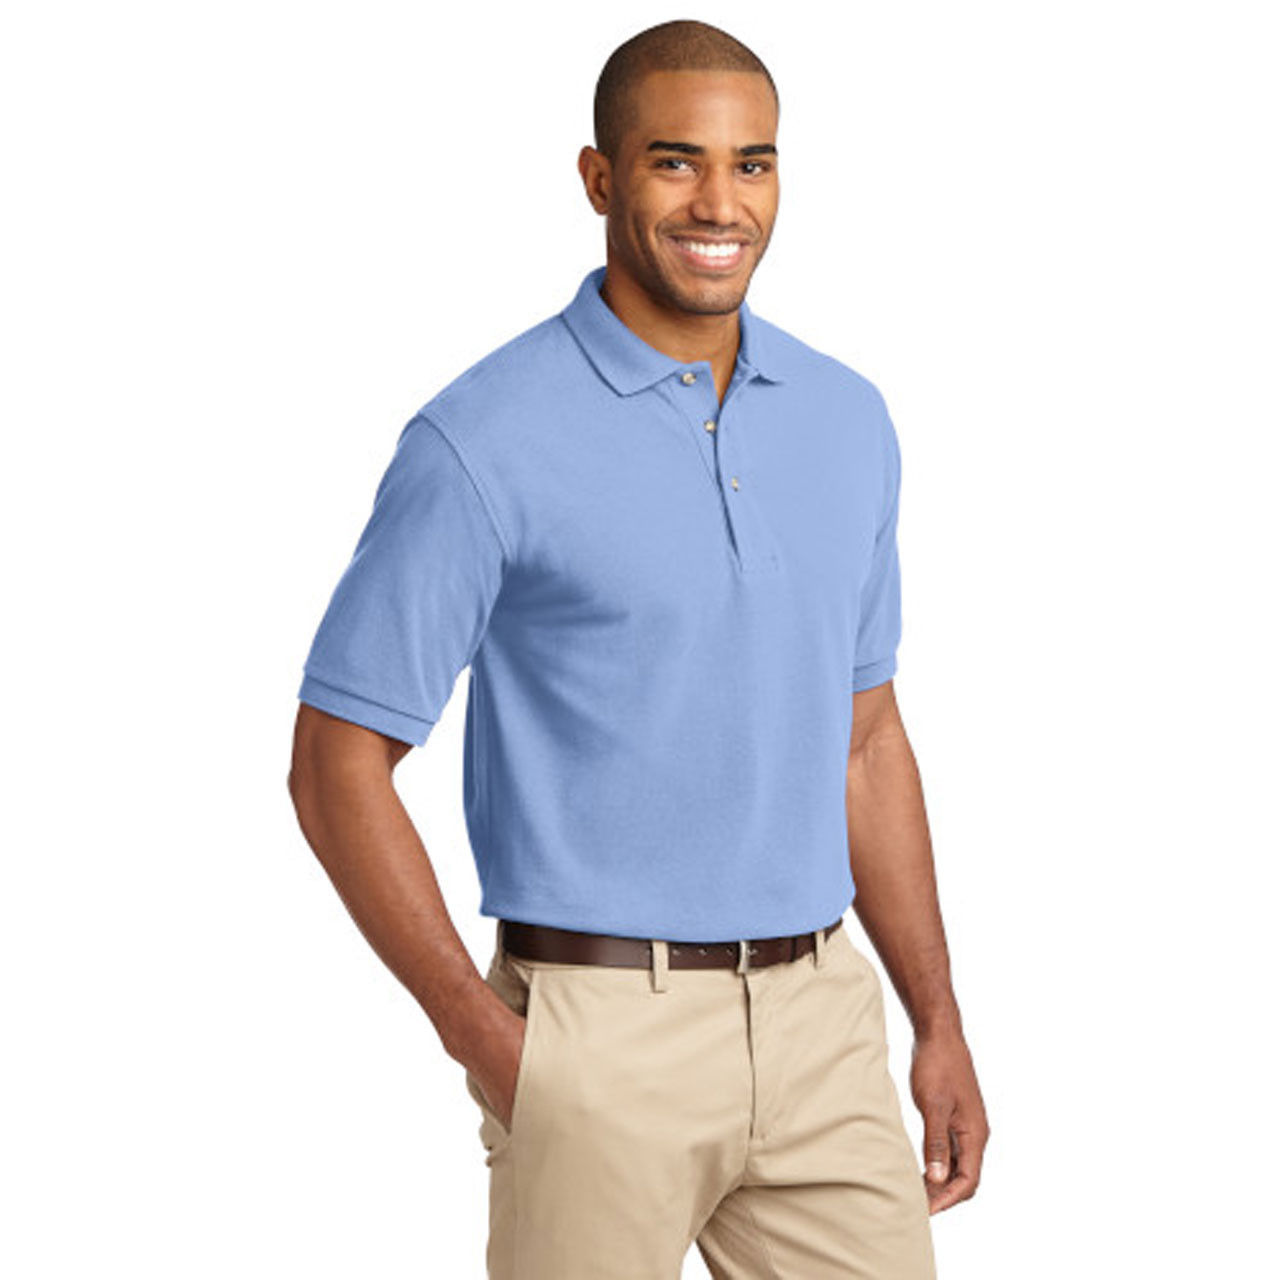 Is the men's blue polo khaki pants made of pique material?